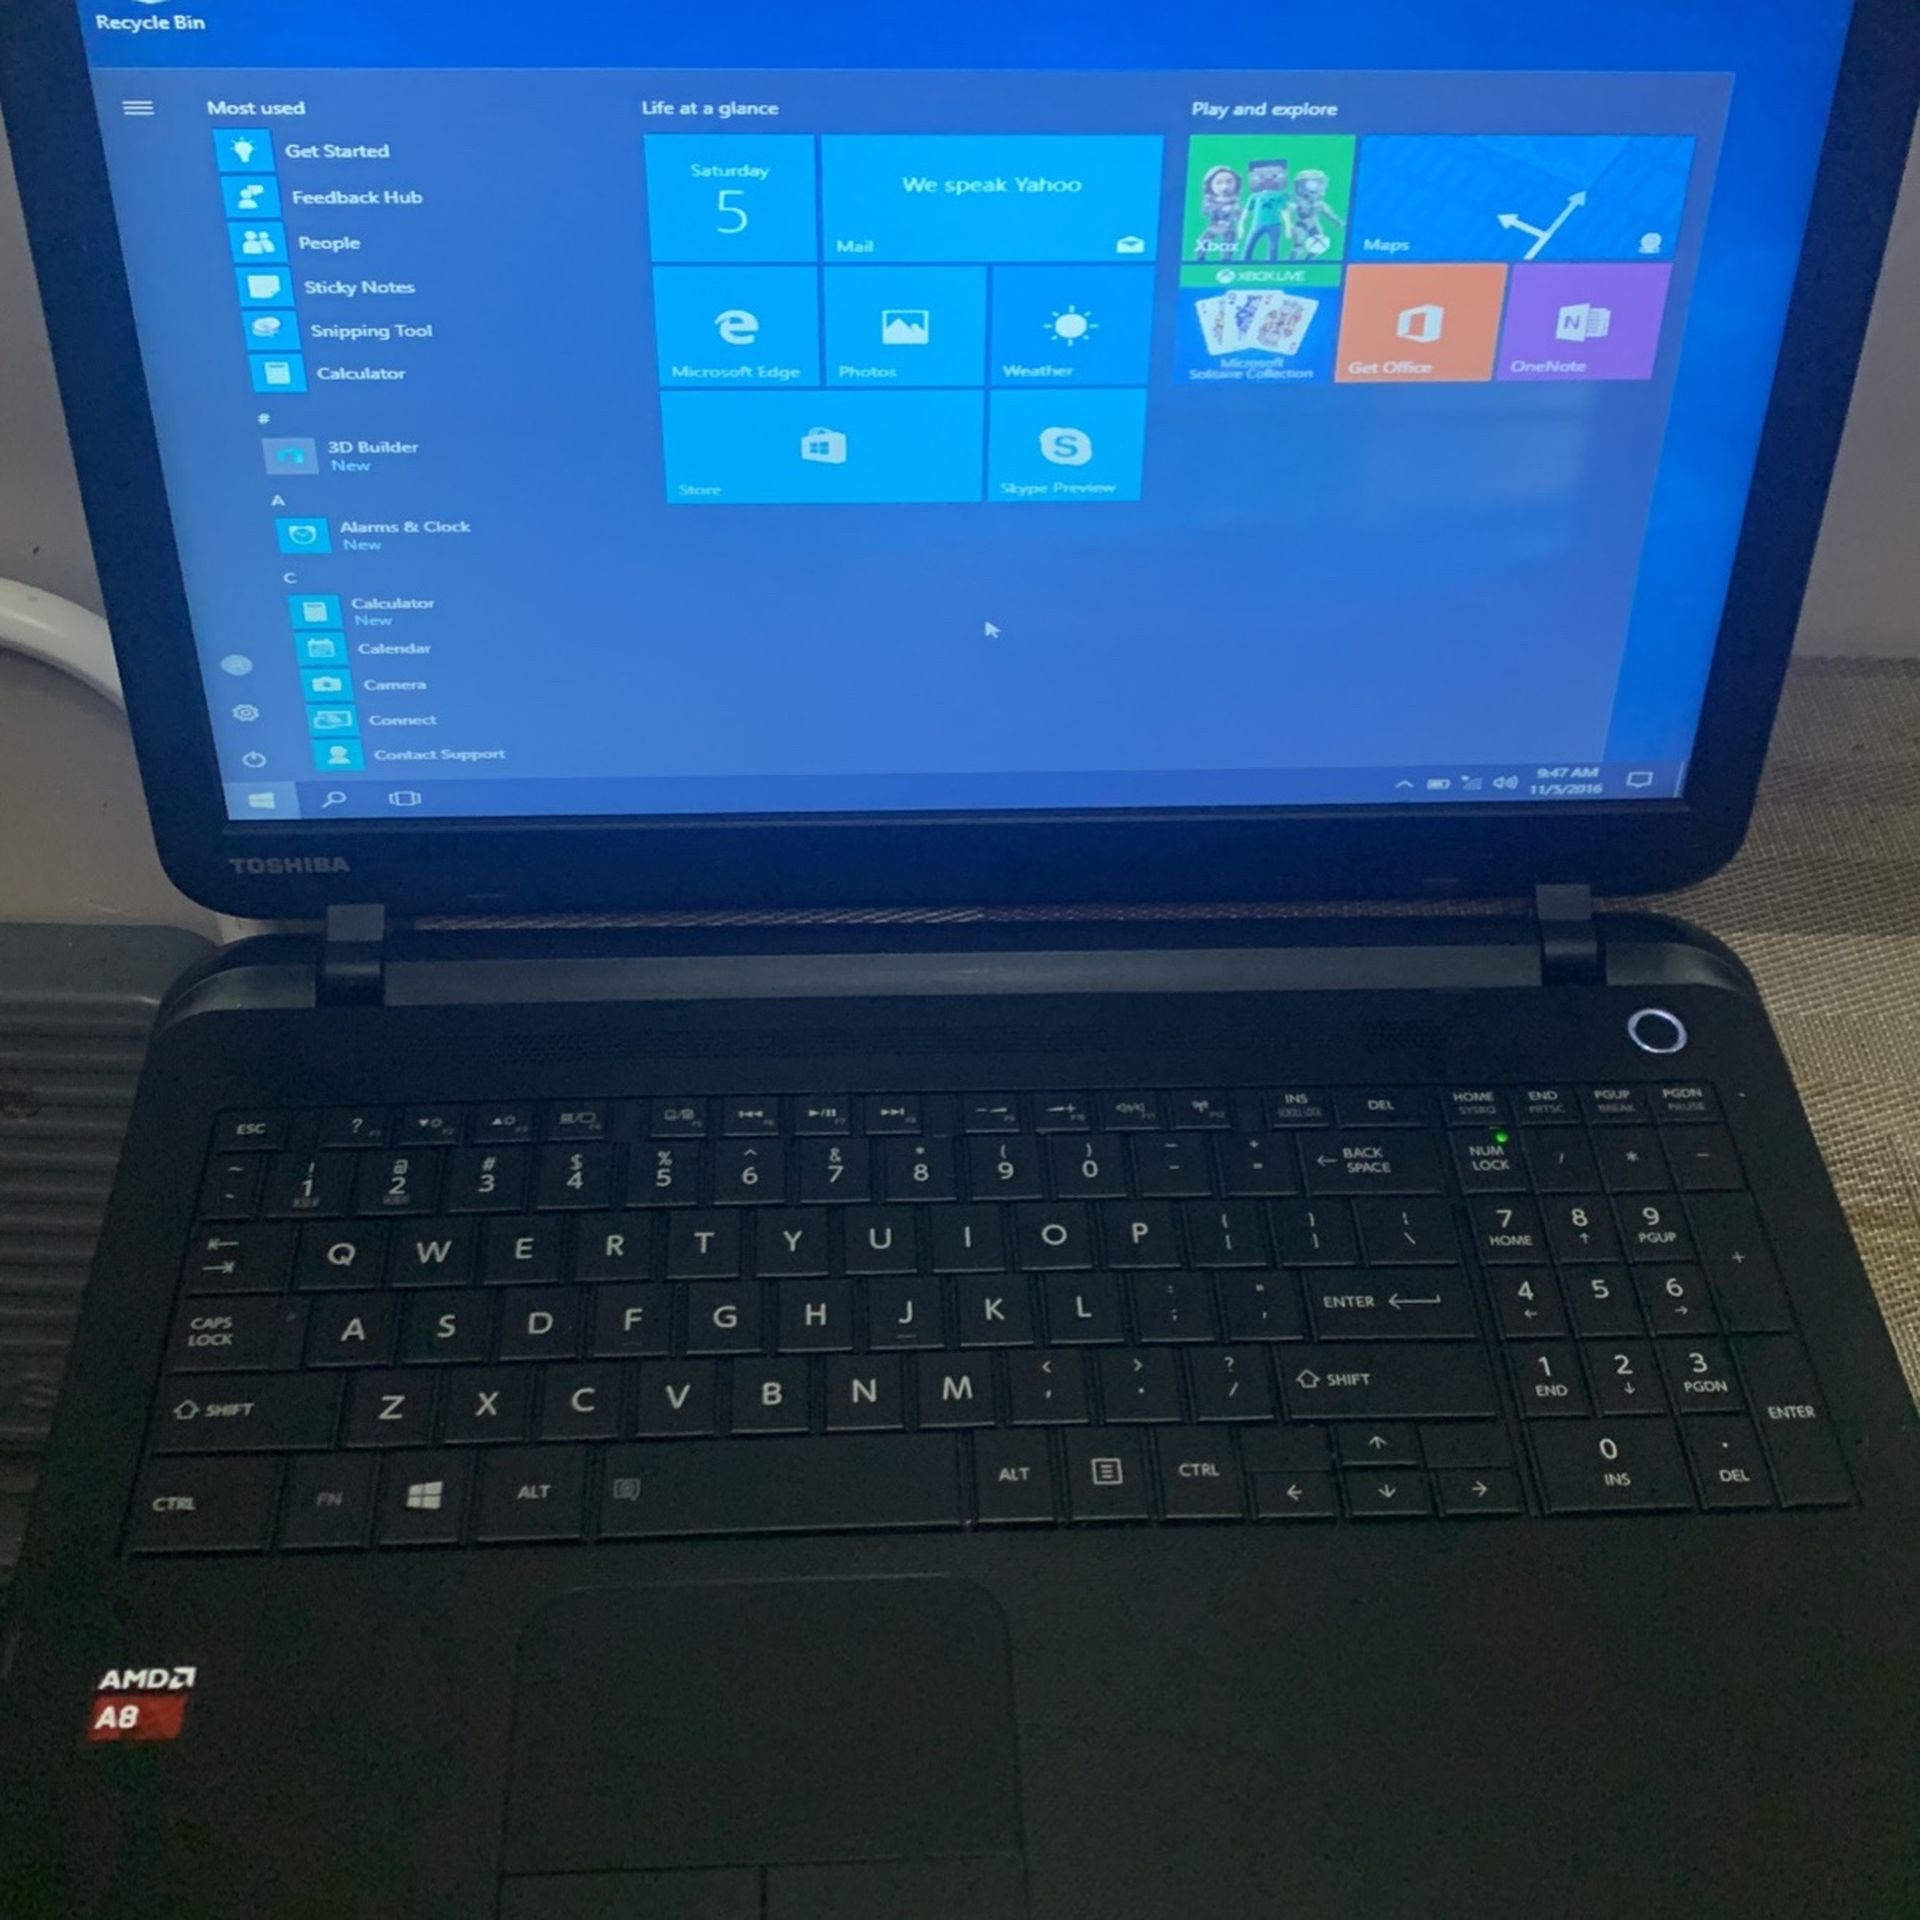 Toshiba Satellite C55D-B5203 Laptop 4gb ram And 128gb ssd With Windows 10,Microsoft Word ,excel And Power Point Ready to Use